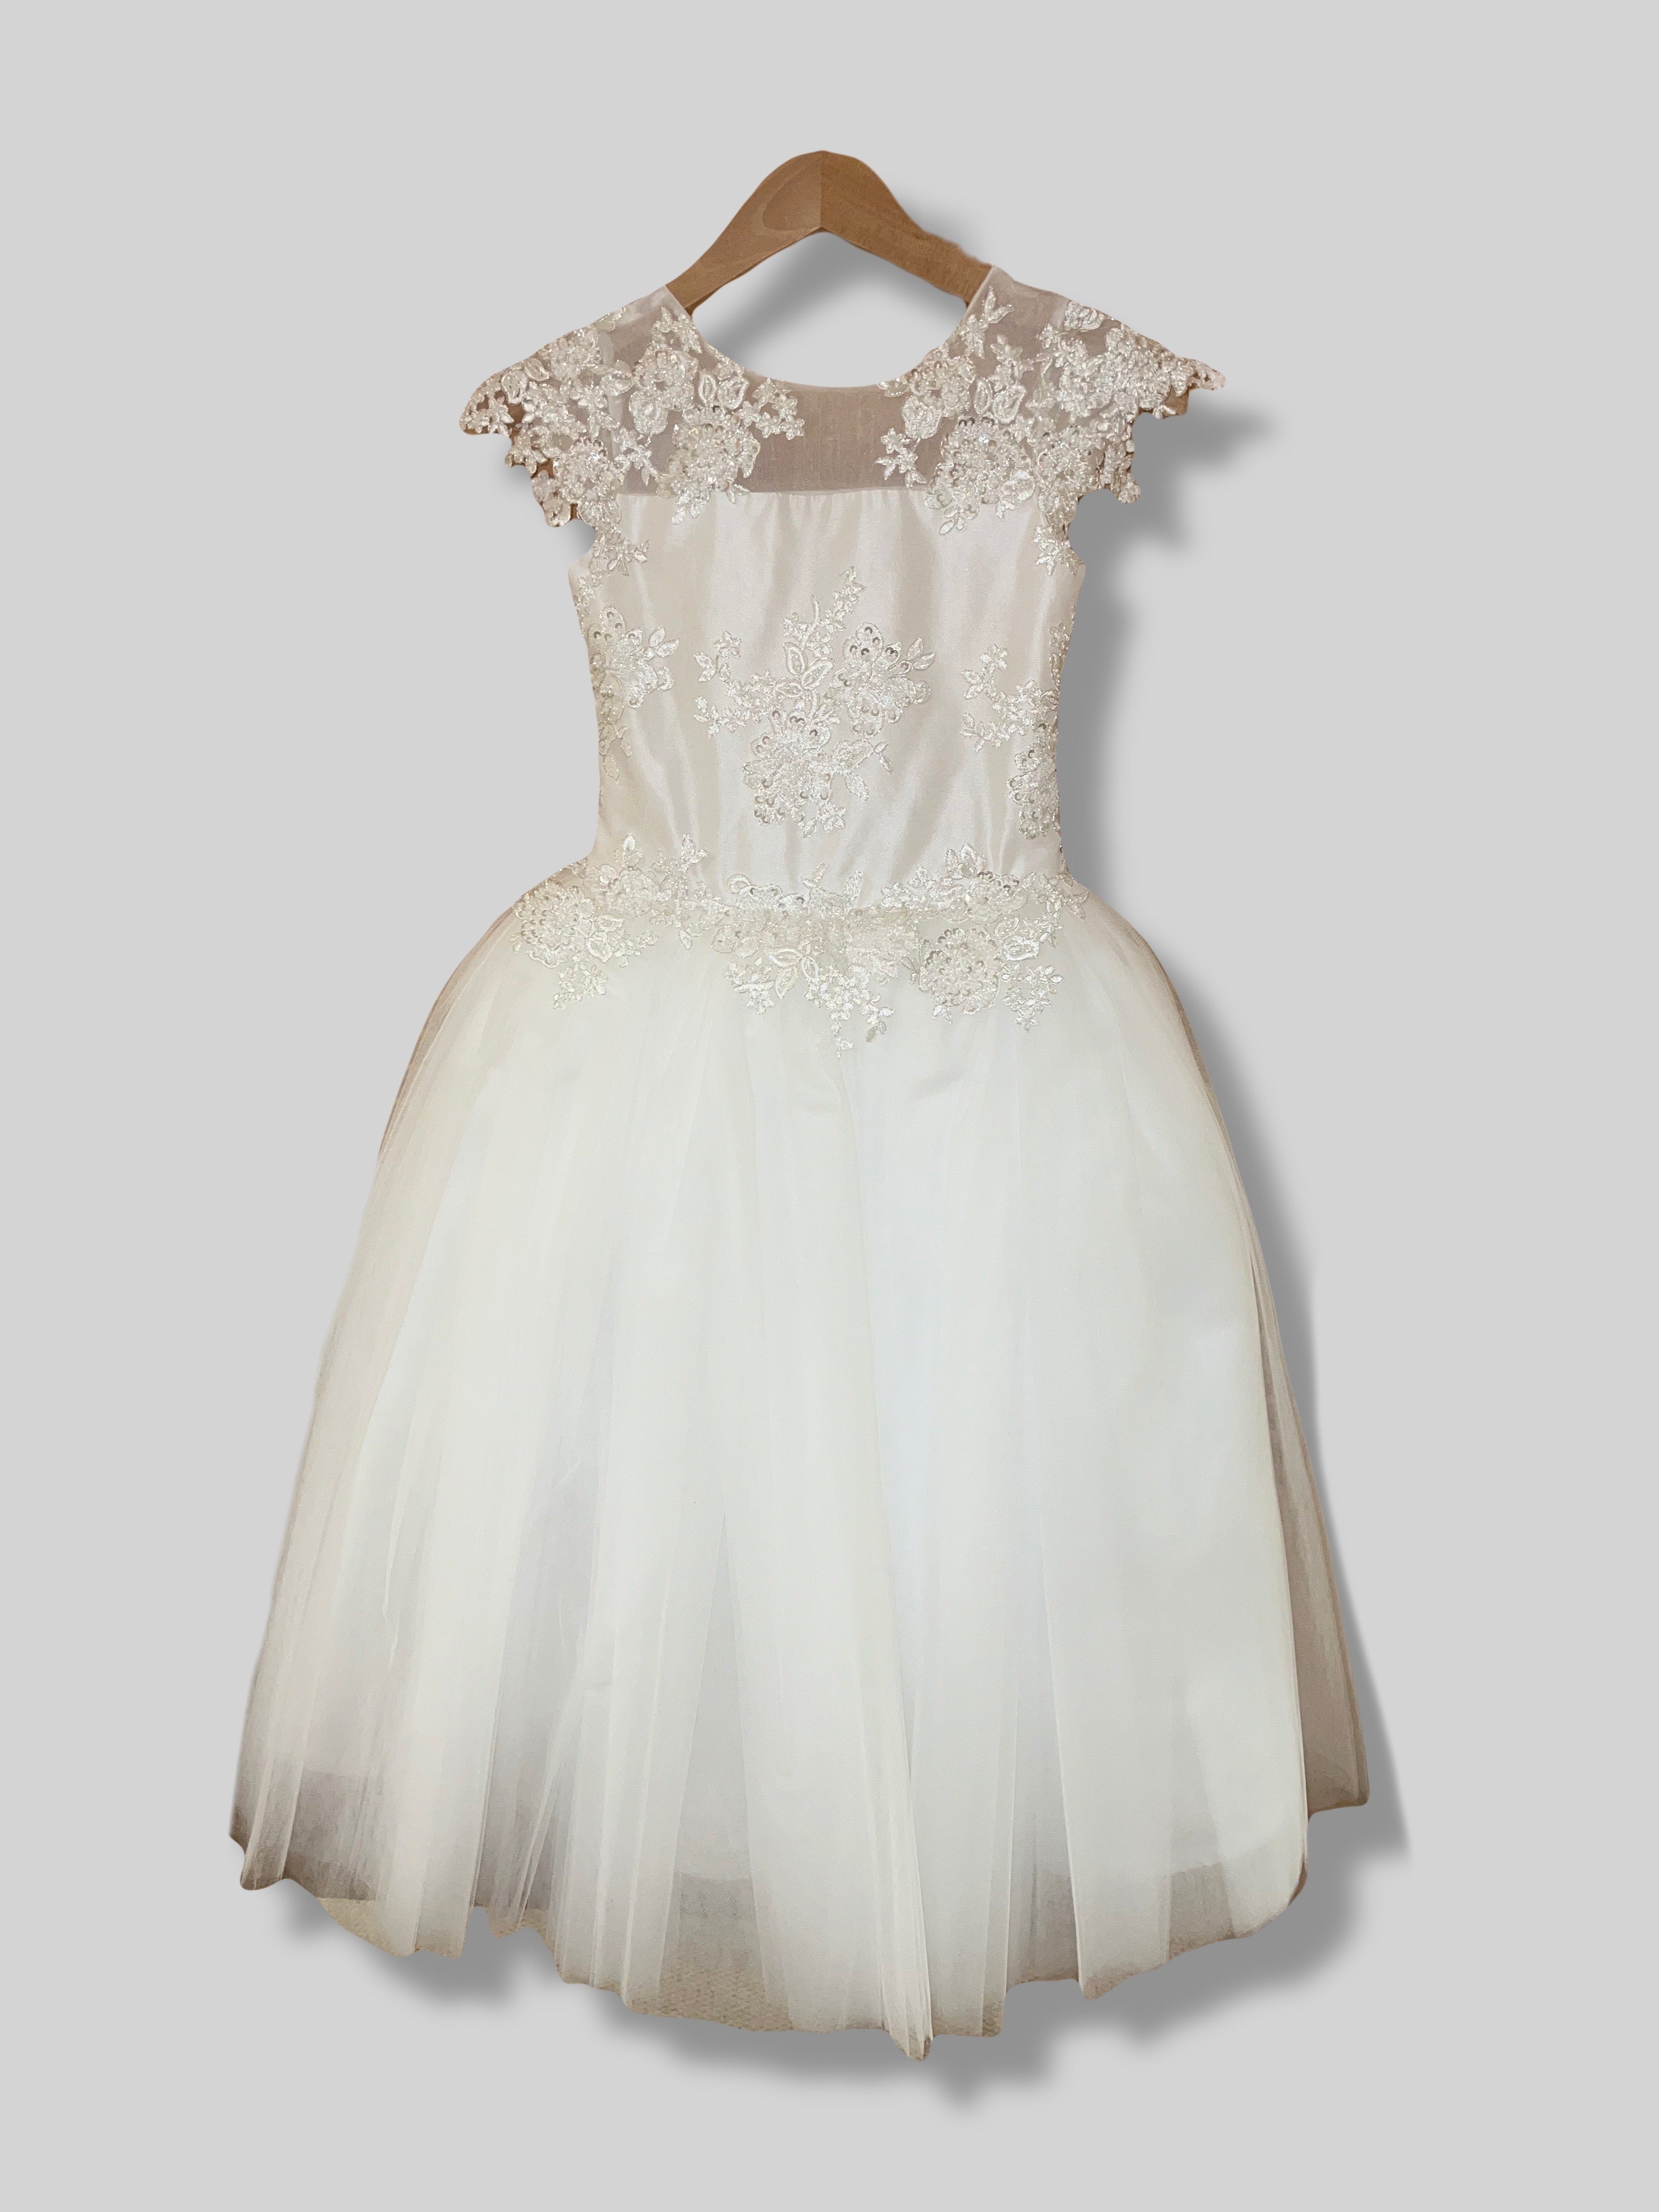 Silk with Lace Overlay Bodice Dress